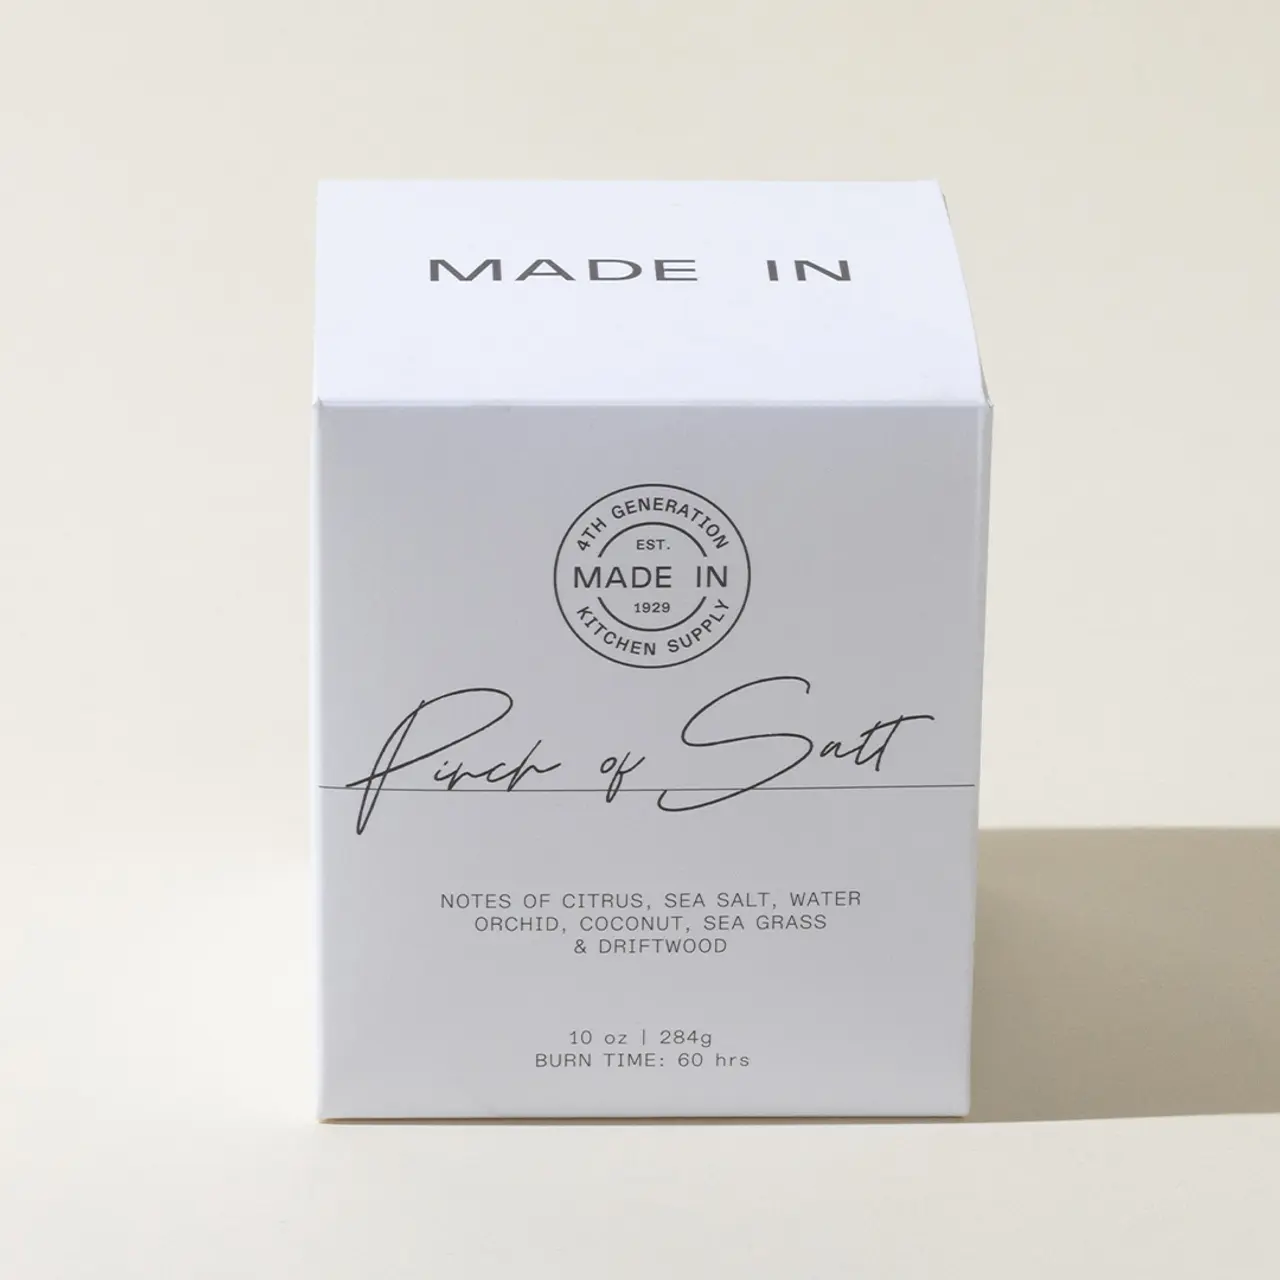 A neatly packaged 'Pinch of Salt' scented candle with a description of fragrances including citrus, sea salt, and driftwood on a plain background.